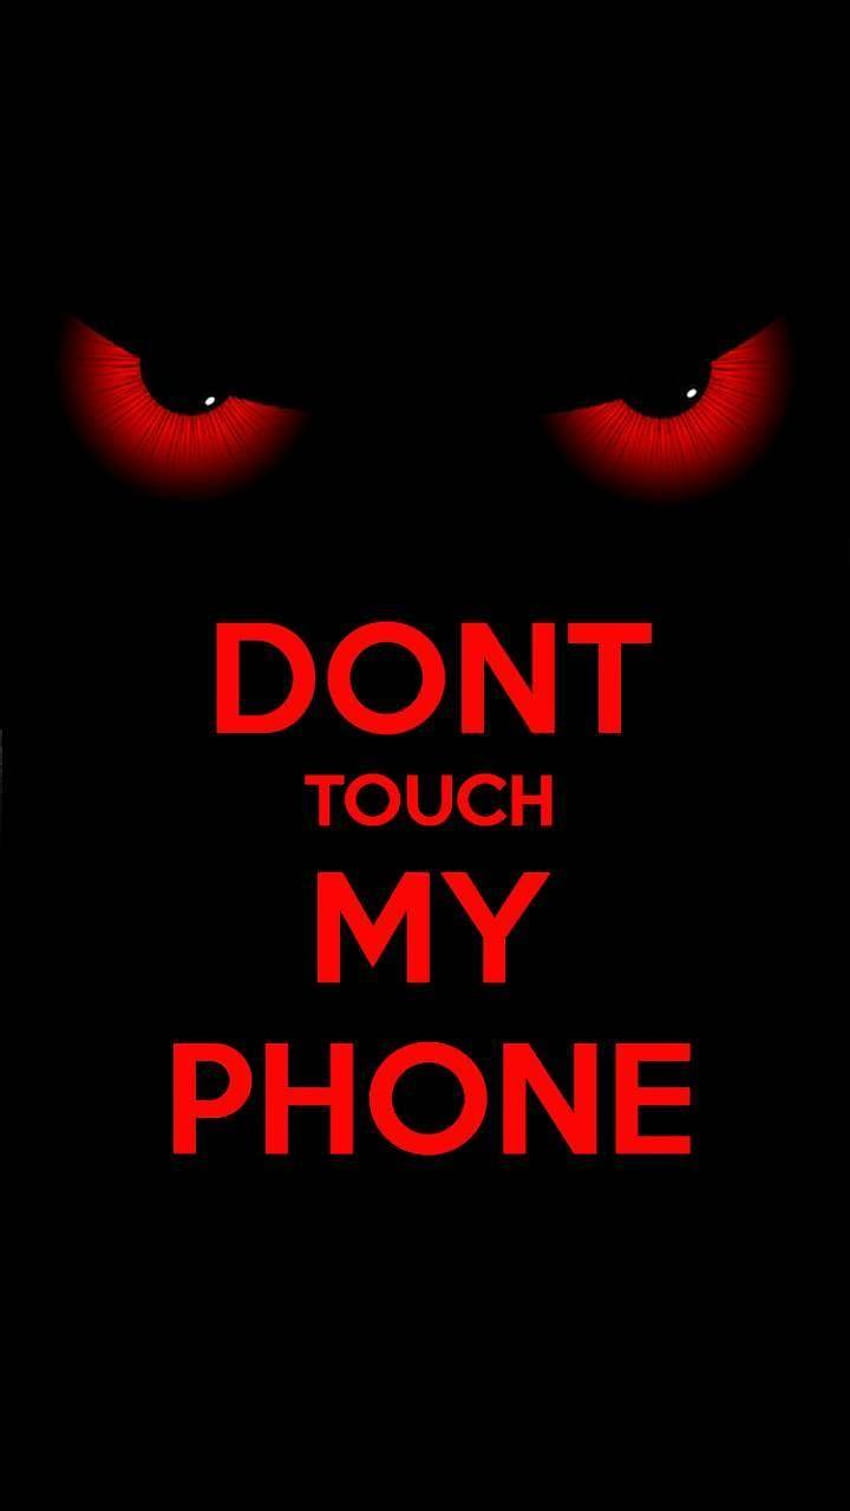 Don't touch my phone by 4RedCyber​​ now, not touch my phone HD電話の壁紙